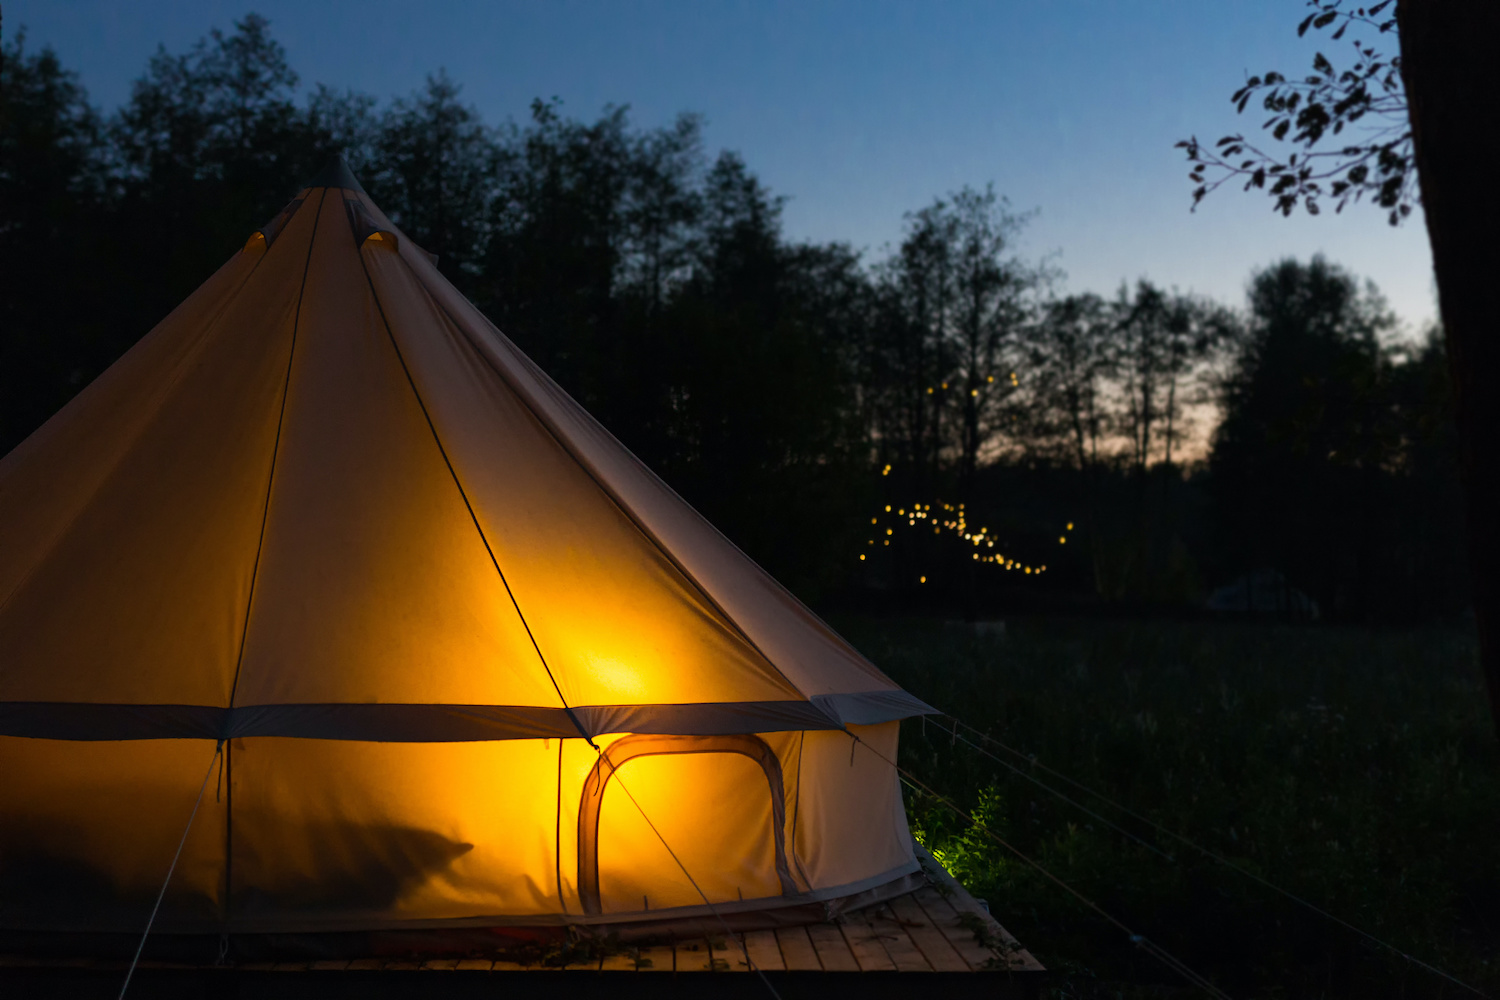 Canvas glamping tent glows at night